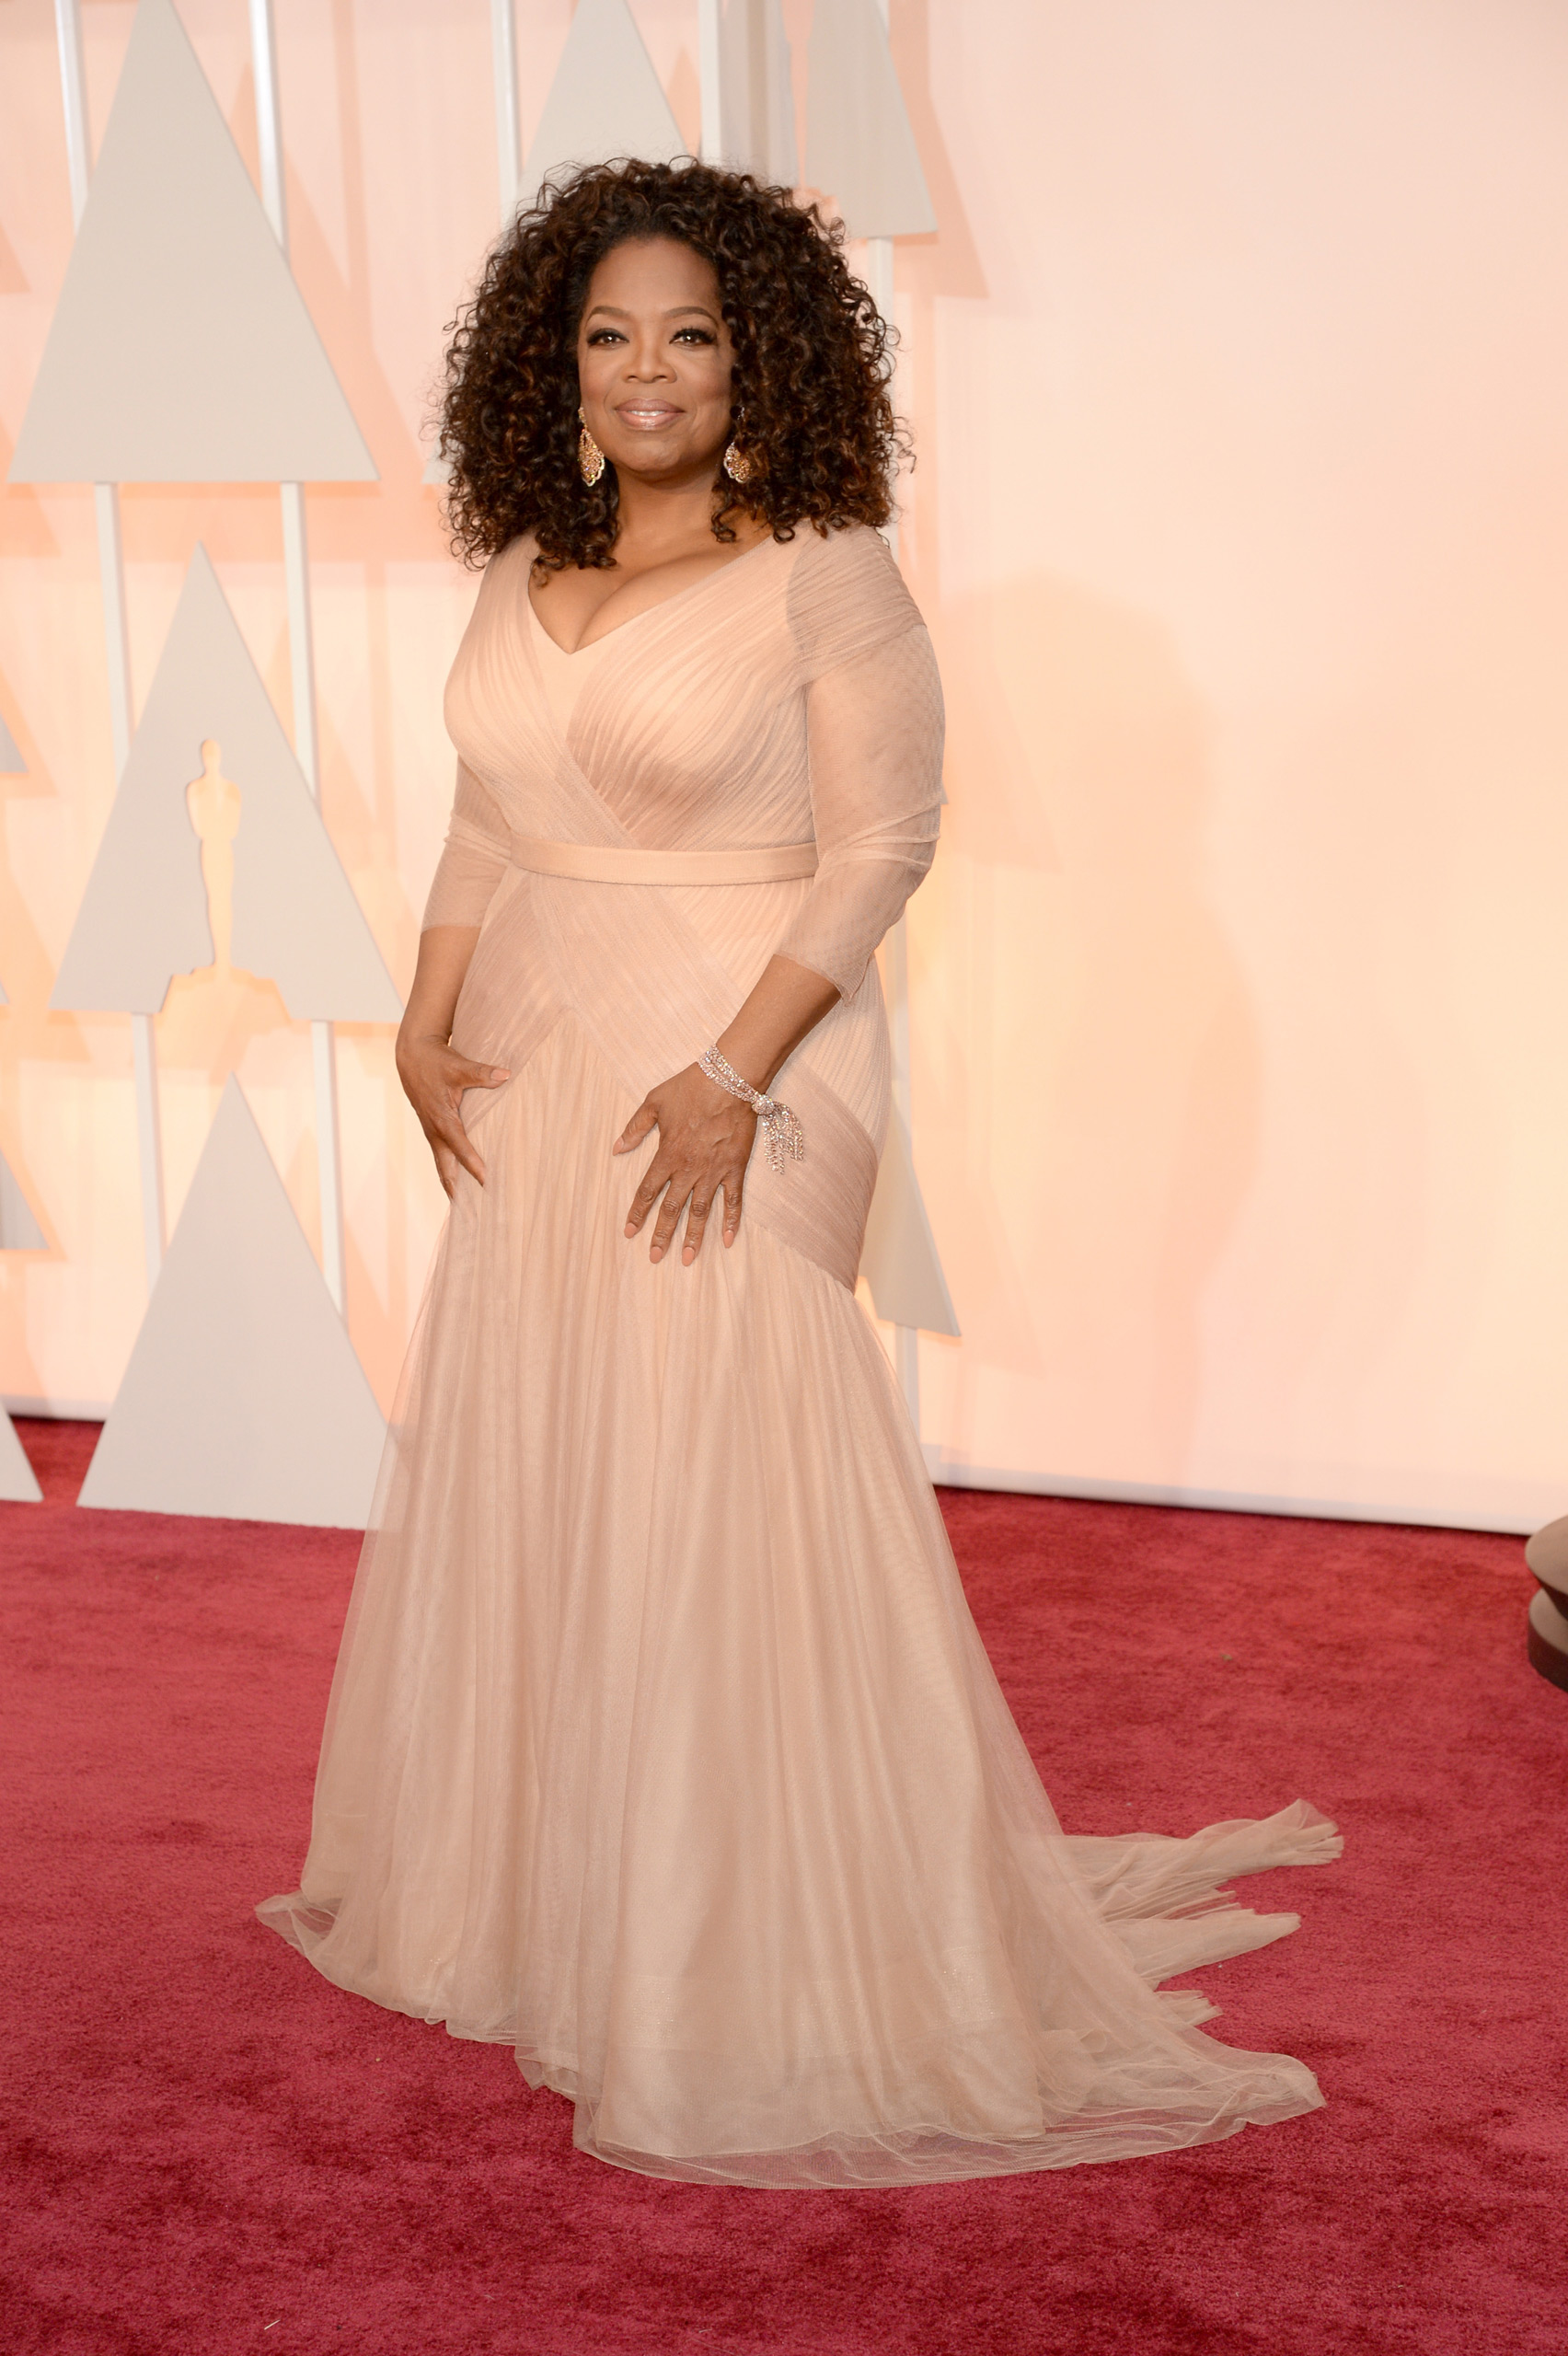 Oprah Winfrey attends the 87th Annual Academy Awards on Feb. 22, 2015 in Hollywood, Calif.